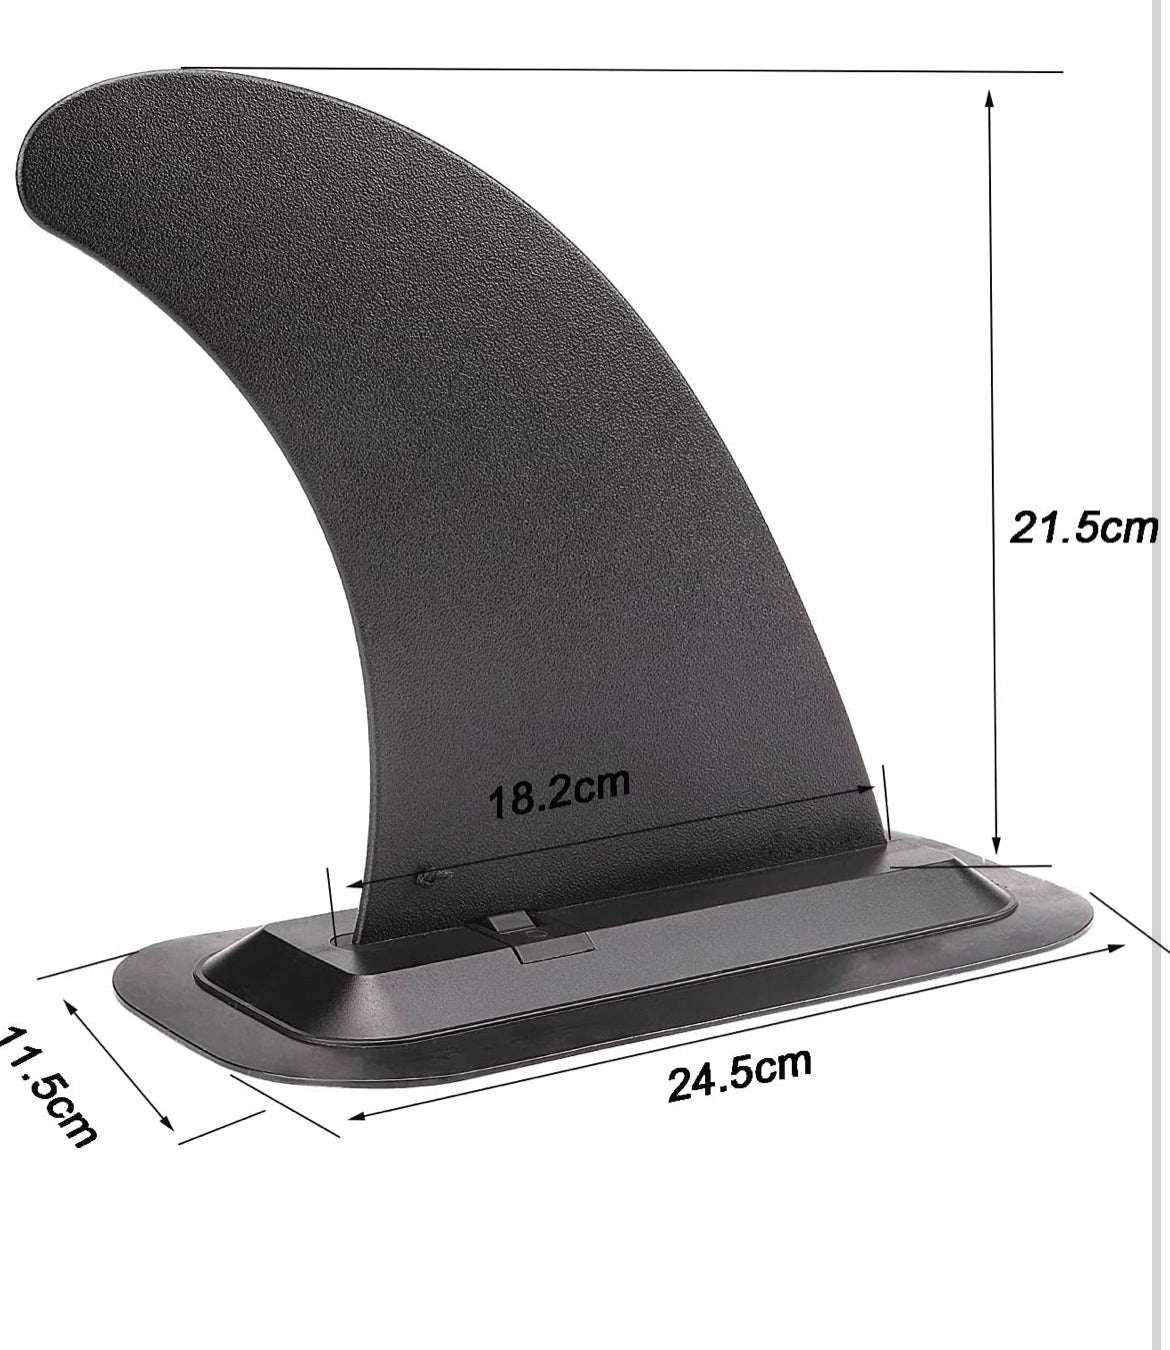 Slifeshop SUP Replacement Big Fin 9 inch Center Fin Replacement with Detachable Fin Dock tail fin for Long Board Paddle Board